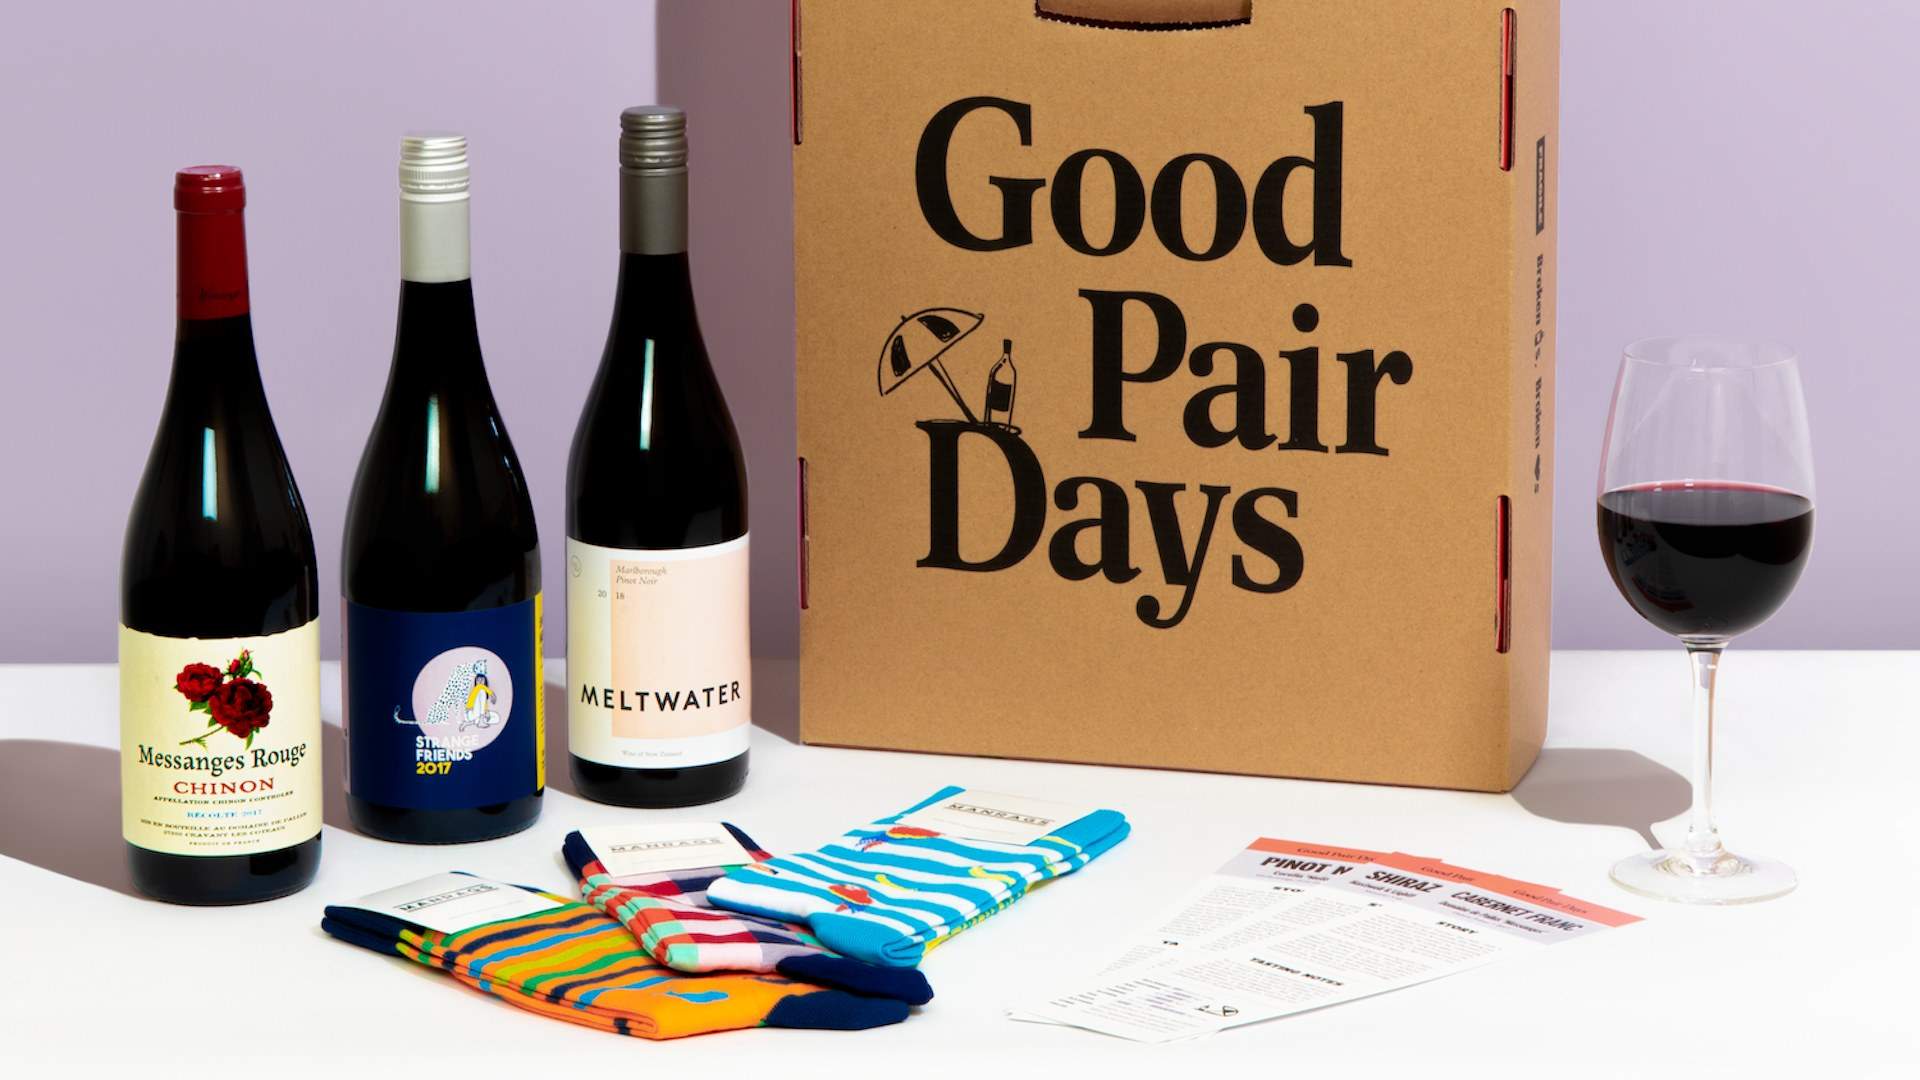 Good Pair Days Is Offering Special Socks and Wine Boxes for Vino-Loving Dads This Father's Day